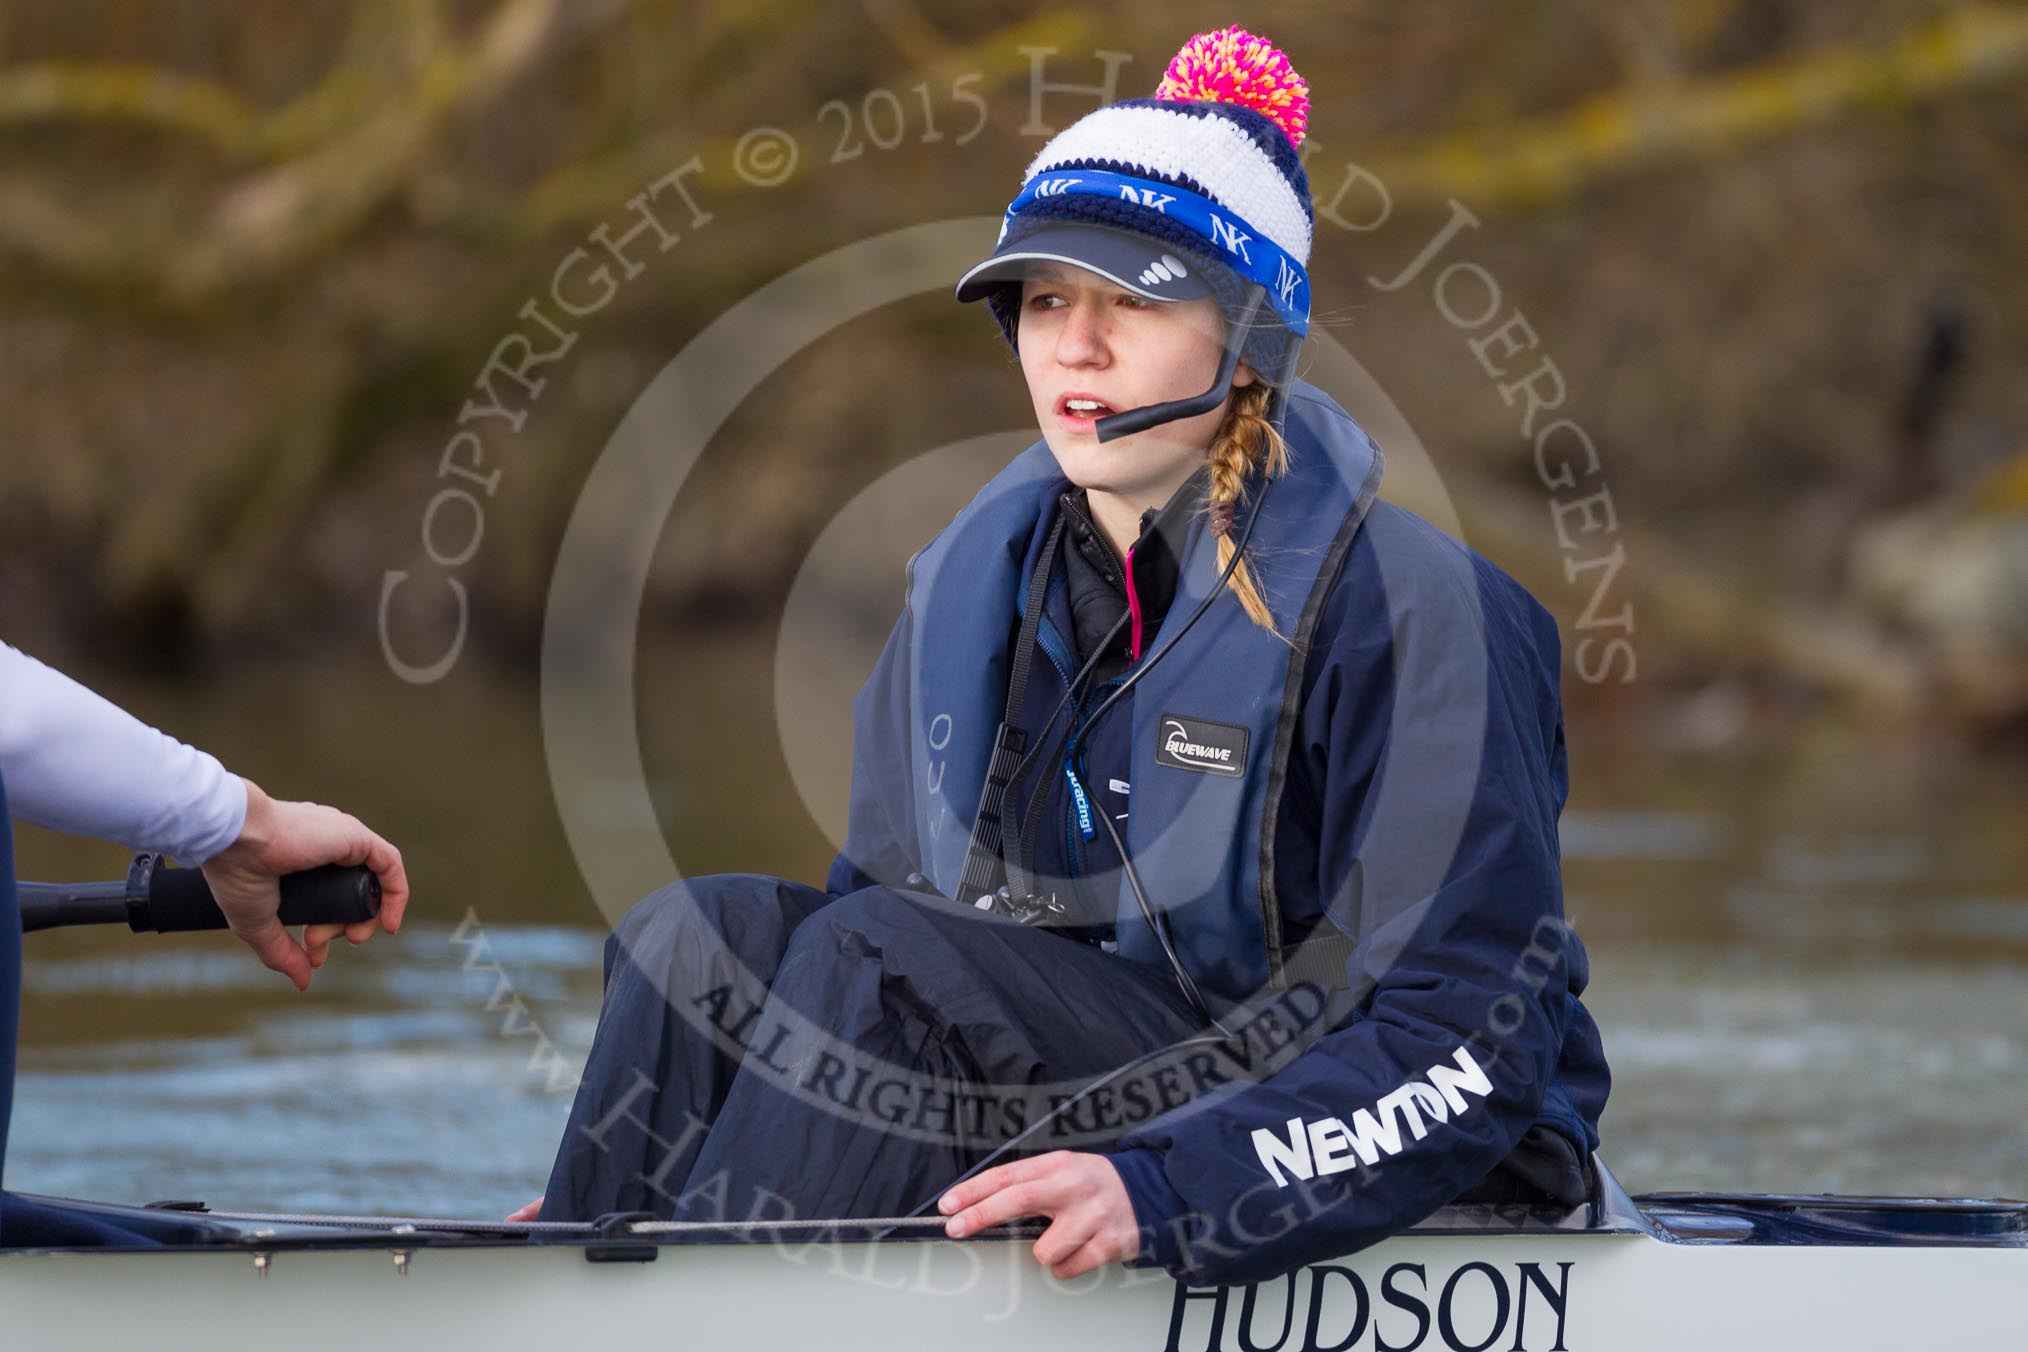 The Boat Race season 2015: OUWBC training Wallingford.

Wallingford,

United Kingdom,
on 04 March 2015 at 15:48, image #87